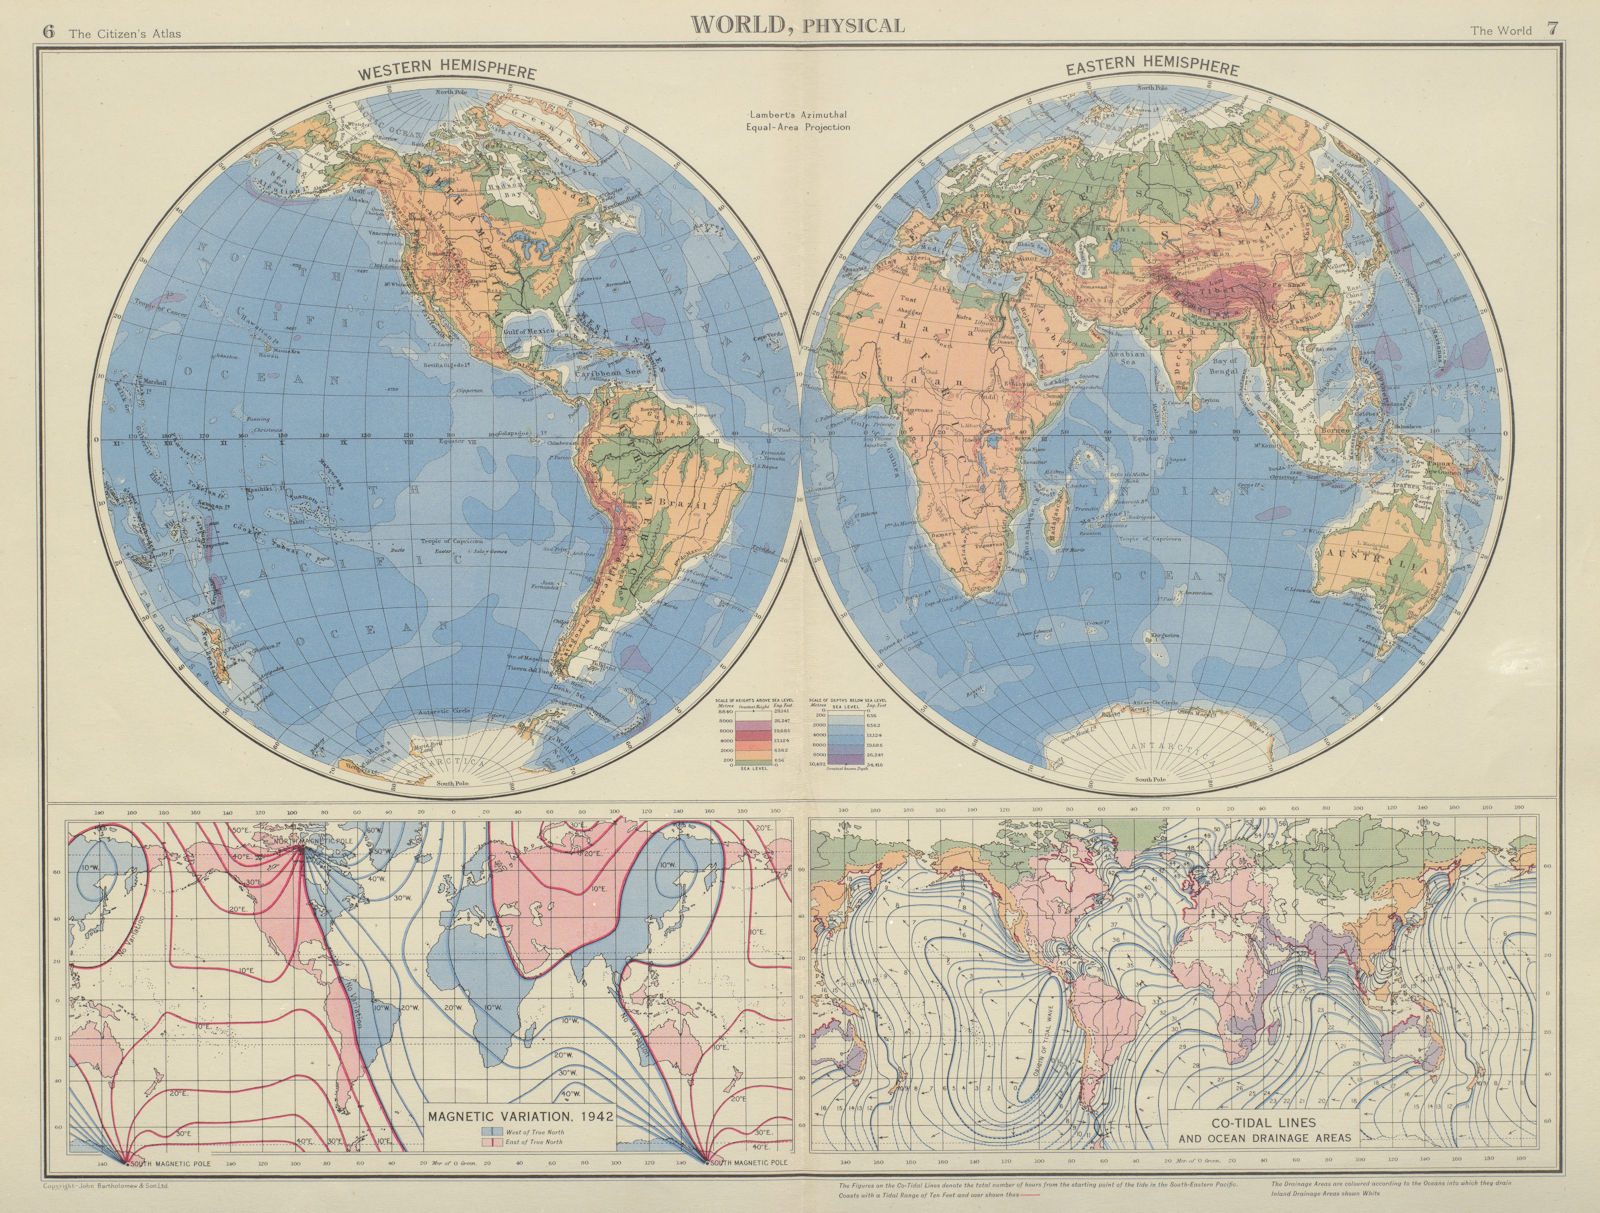 WORLD MAGNETIC VARIATION & COTIDAL LINES. Physical. Ocean Drainage 1947 map